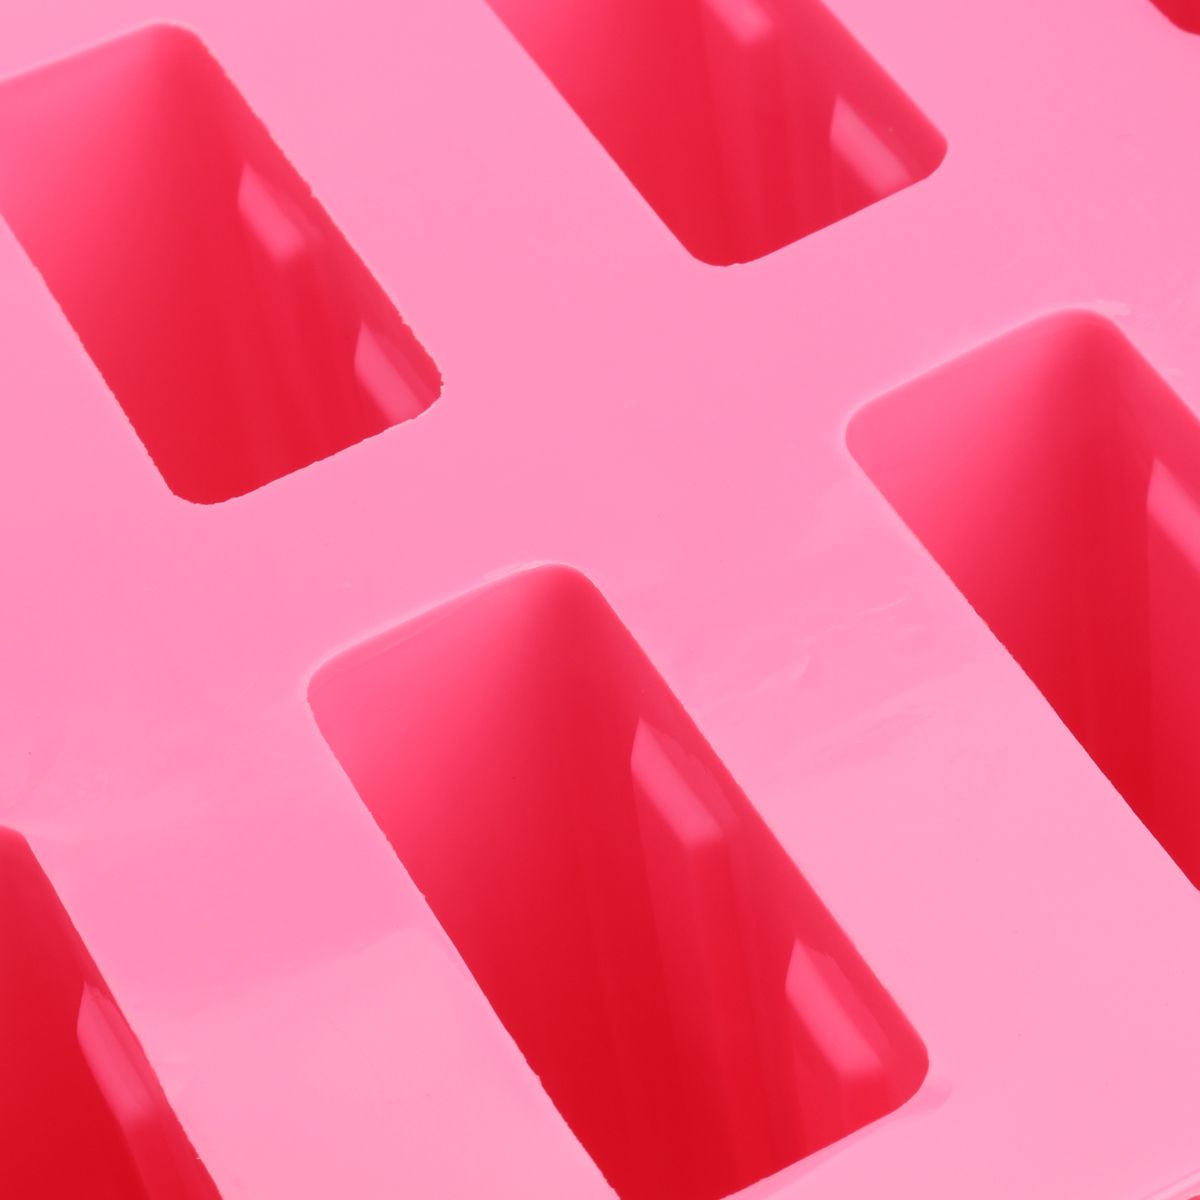 10-Cavity-Frozen-Ice-Cream-Pop-Mold-Maker-Lolly-Silicone-Mould-Tray-Pan-Kitchen-DIY-Stick-1377072